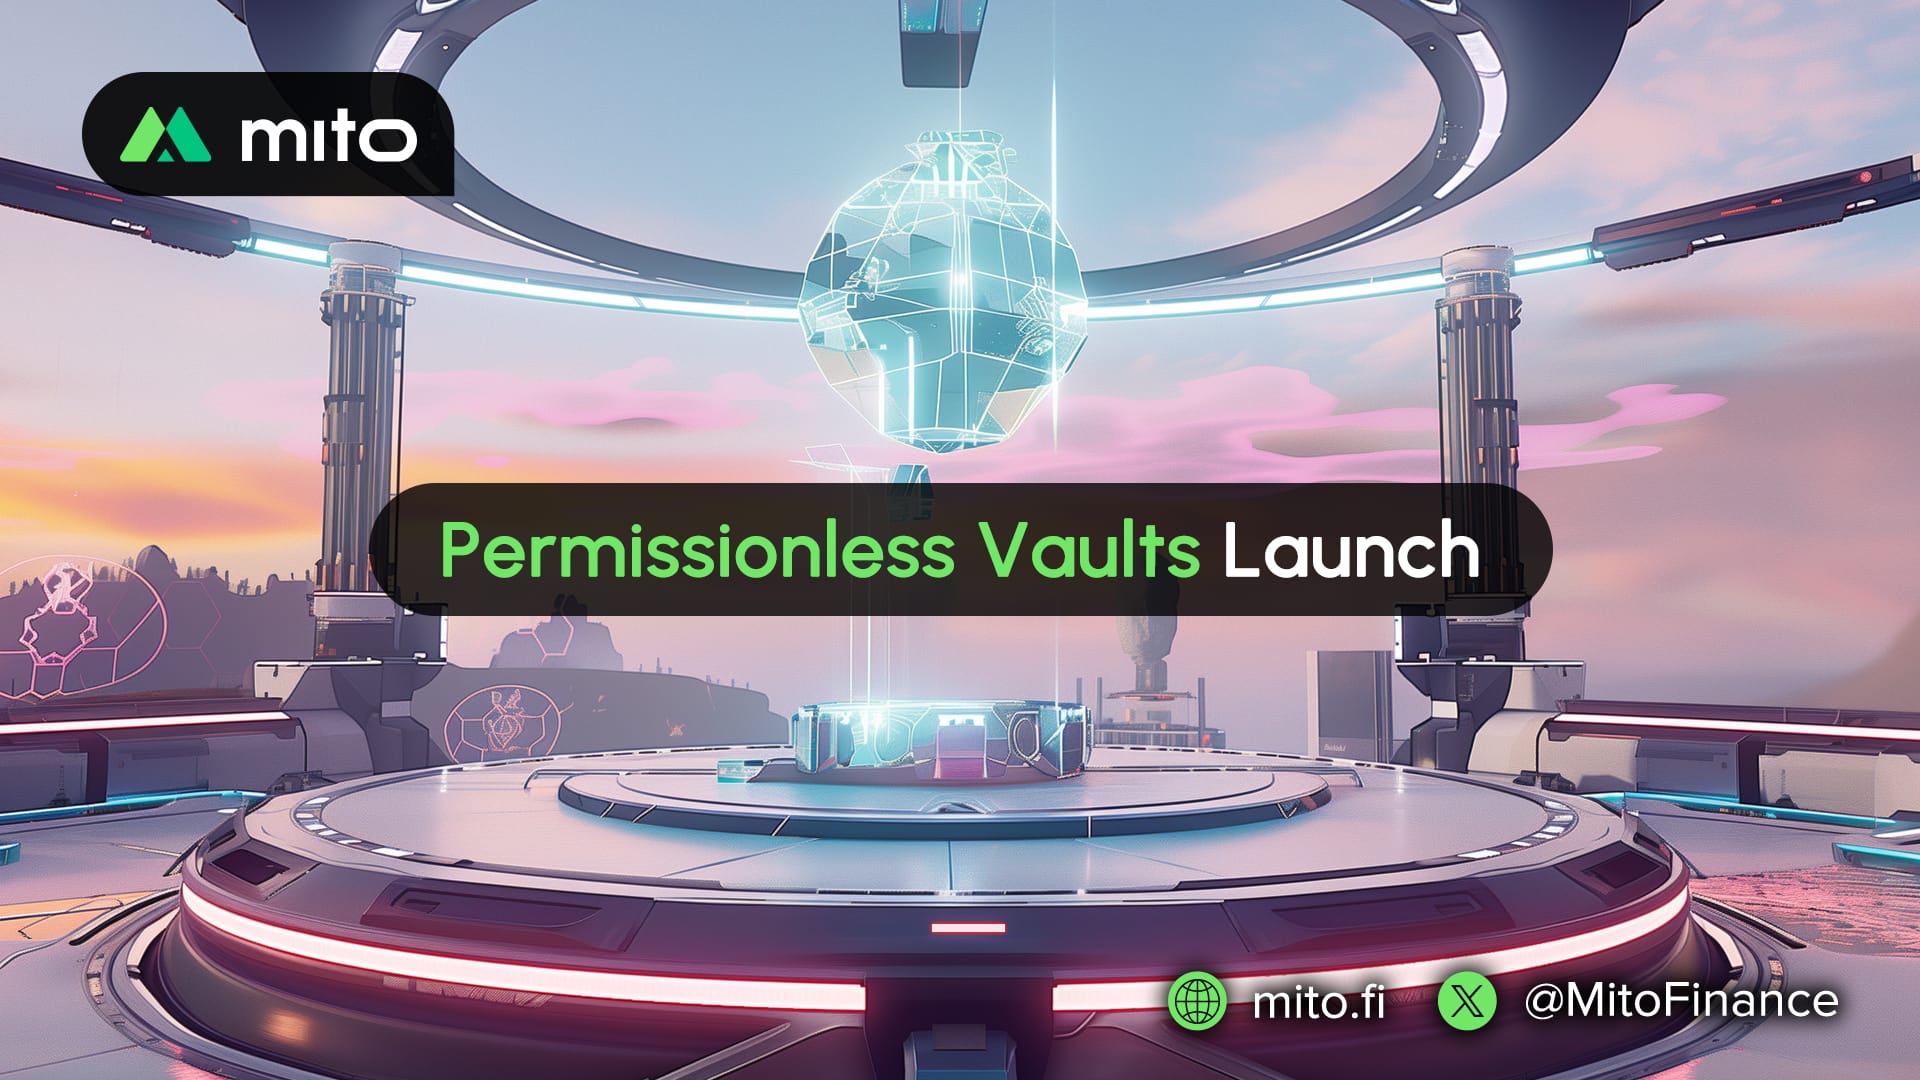 Introducing Permissionless Vaults on Mito